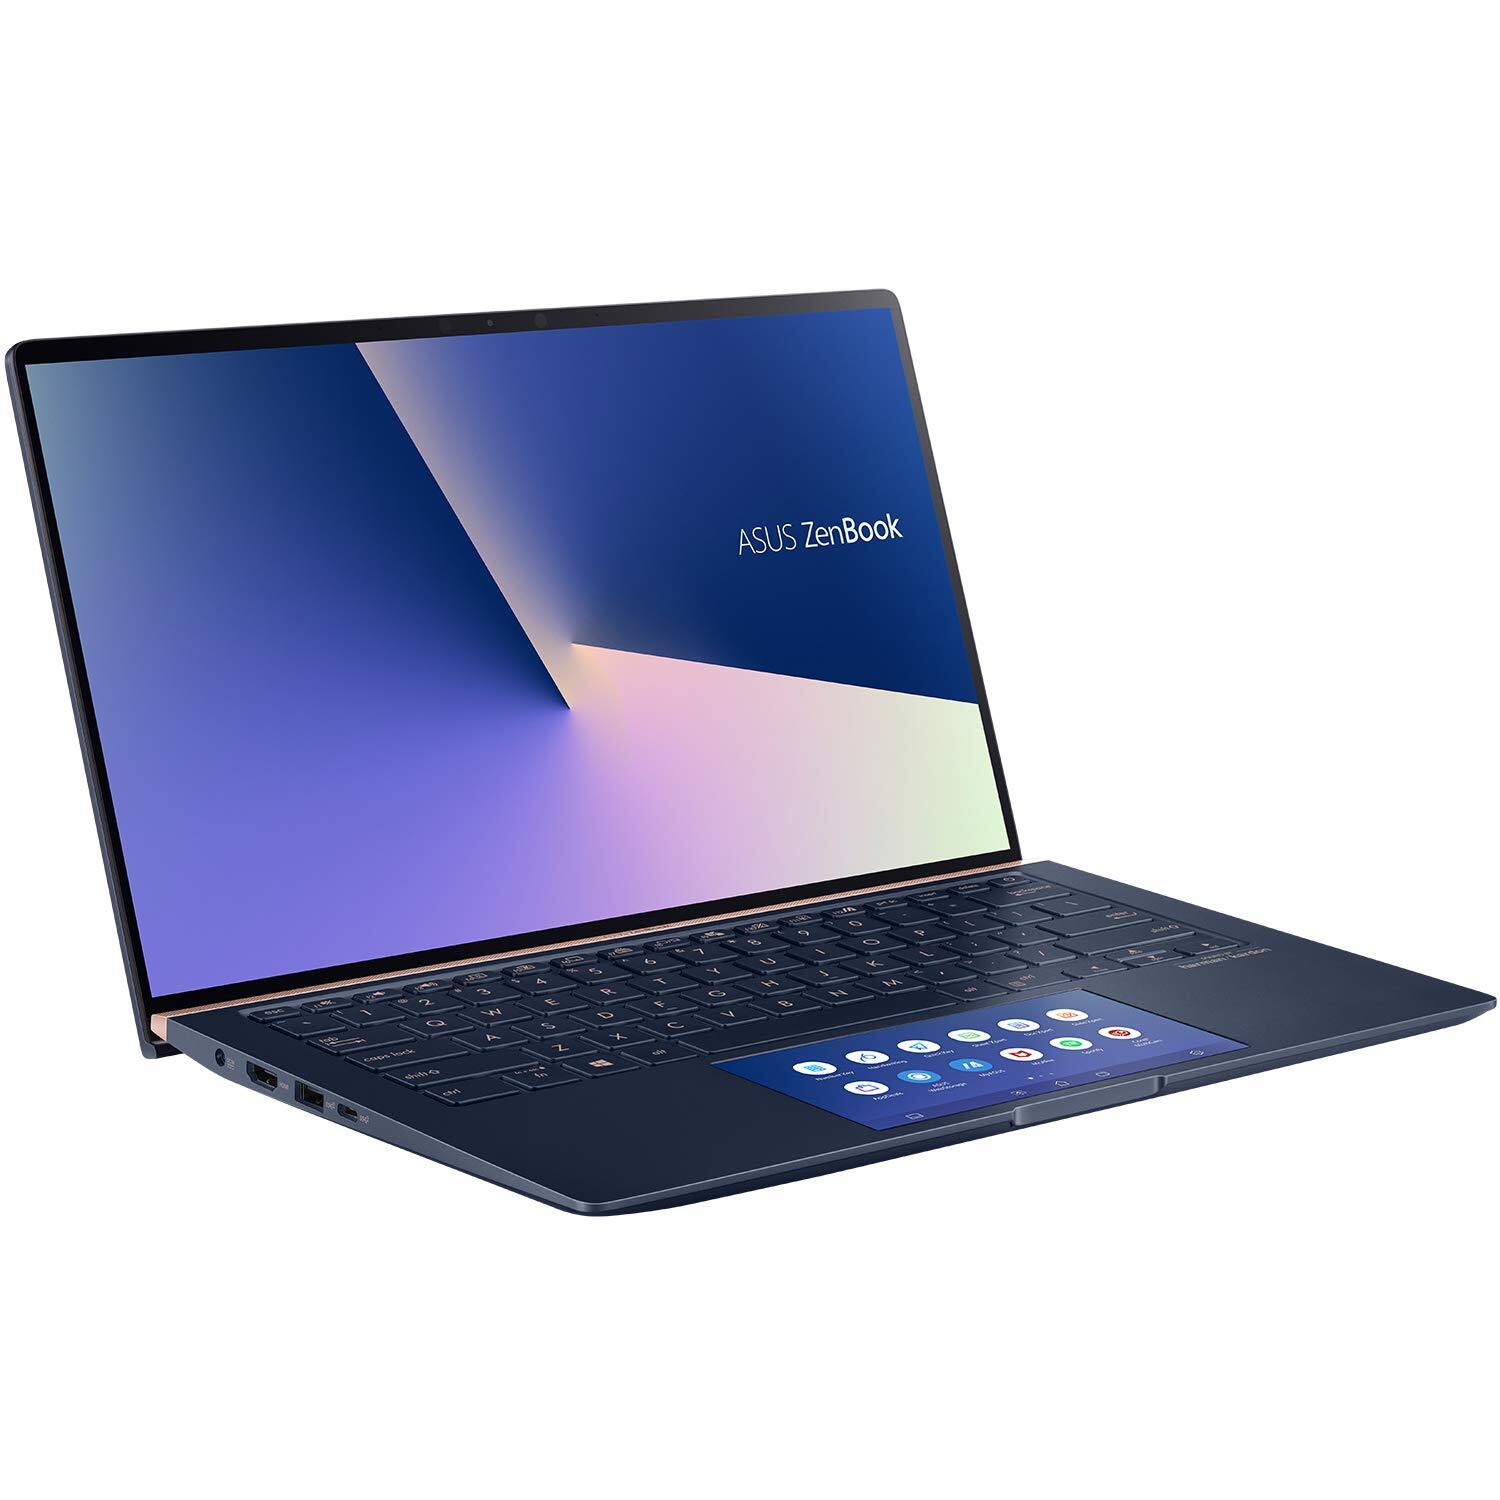 ASUS ZenBook 14 UX434FL-A5822TS Intel Core i5 10th Gen 14-inch FHD Thin & Light Laptop (8GB RAM/512GB PCIe SSD/Windows 10/MS-Office 2019/2GB NVIDIA GeForce MX250 Graphics/1.26 Kg), Icicle Silver